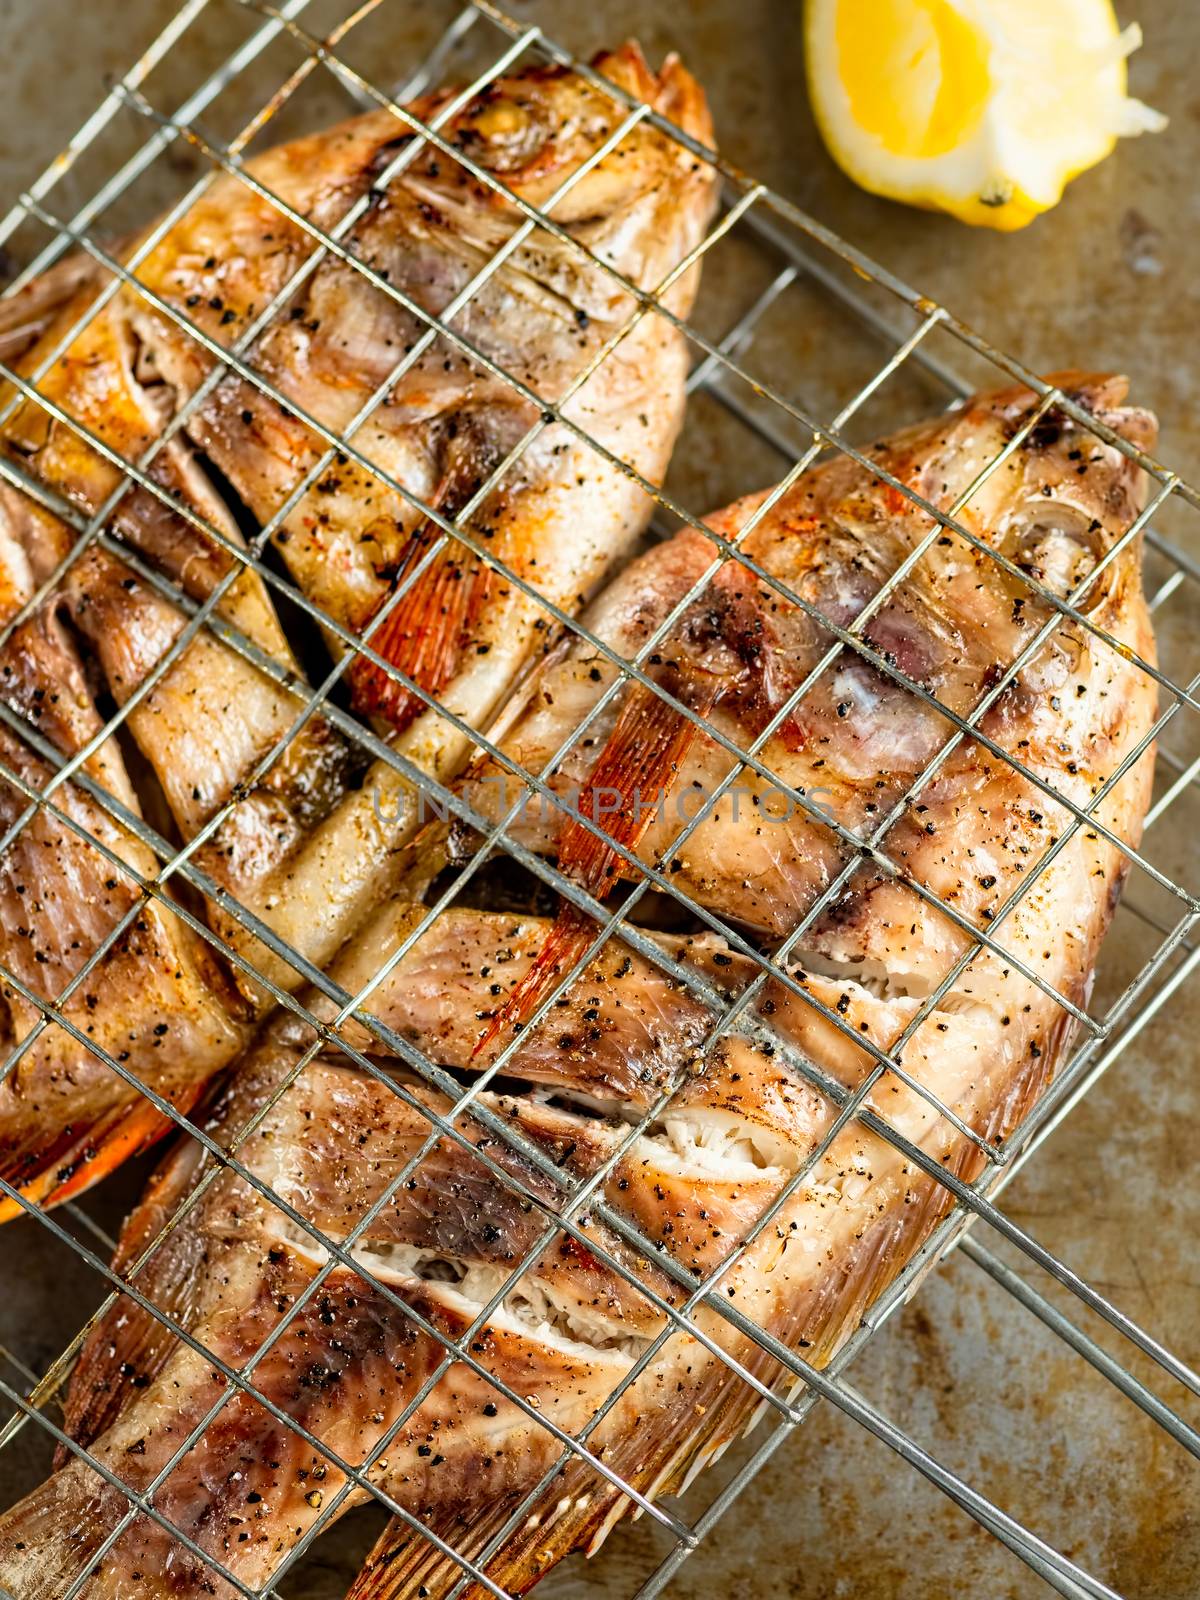 rustic barbecued grilled fish by zkruger